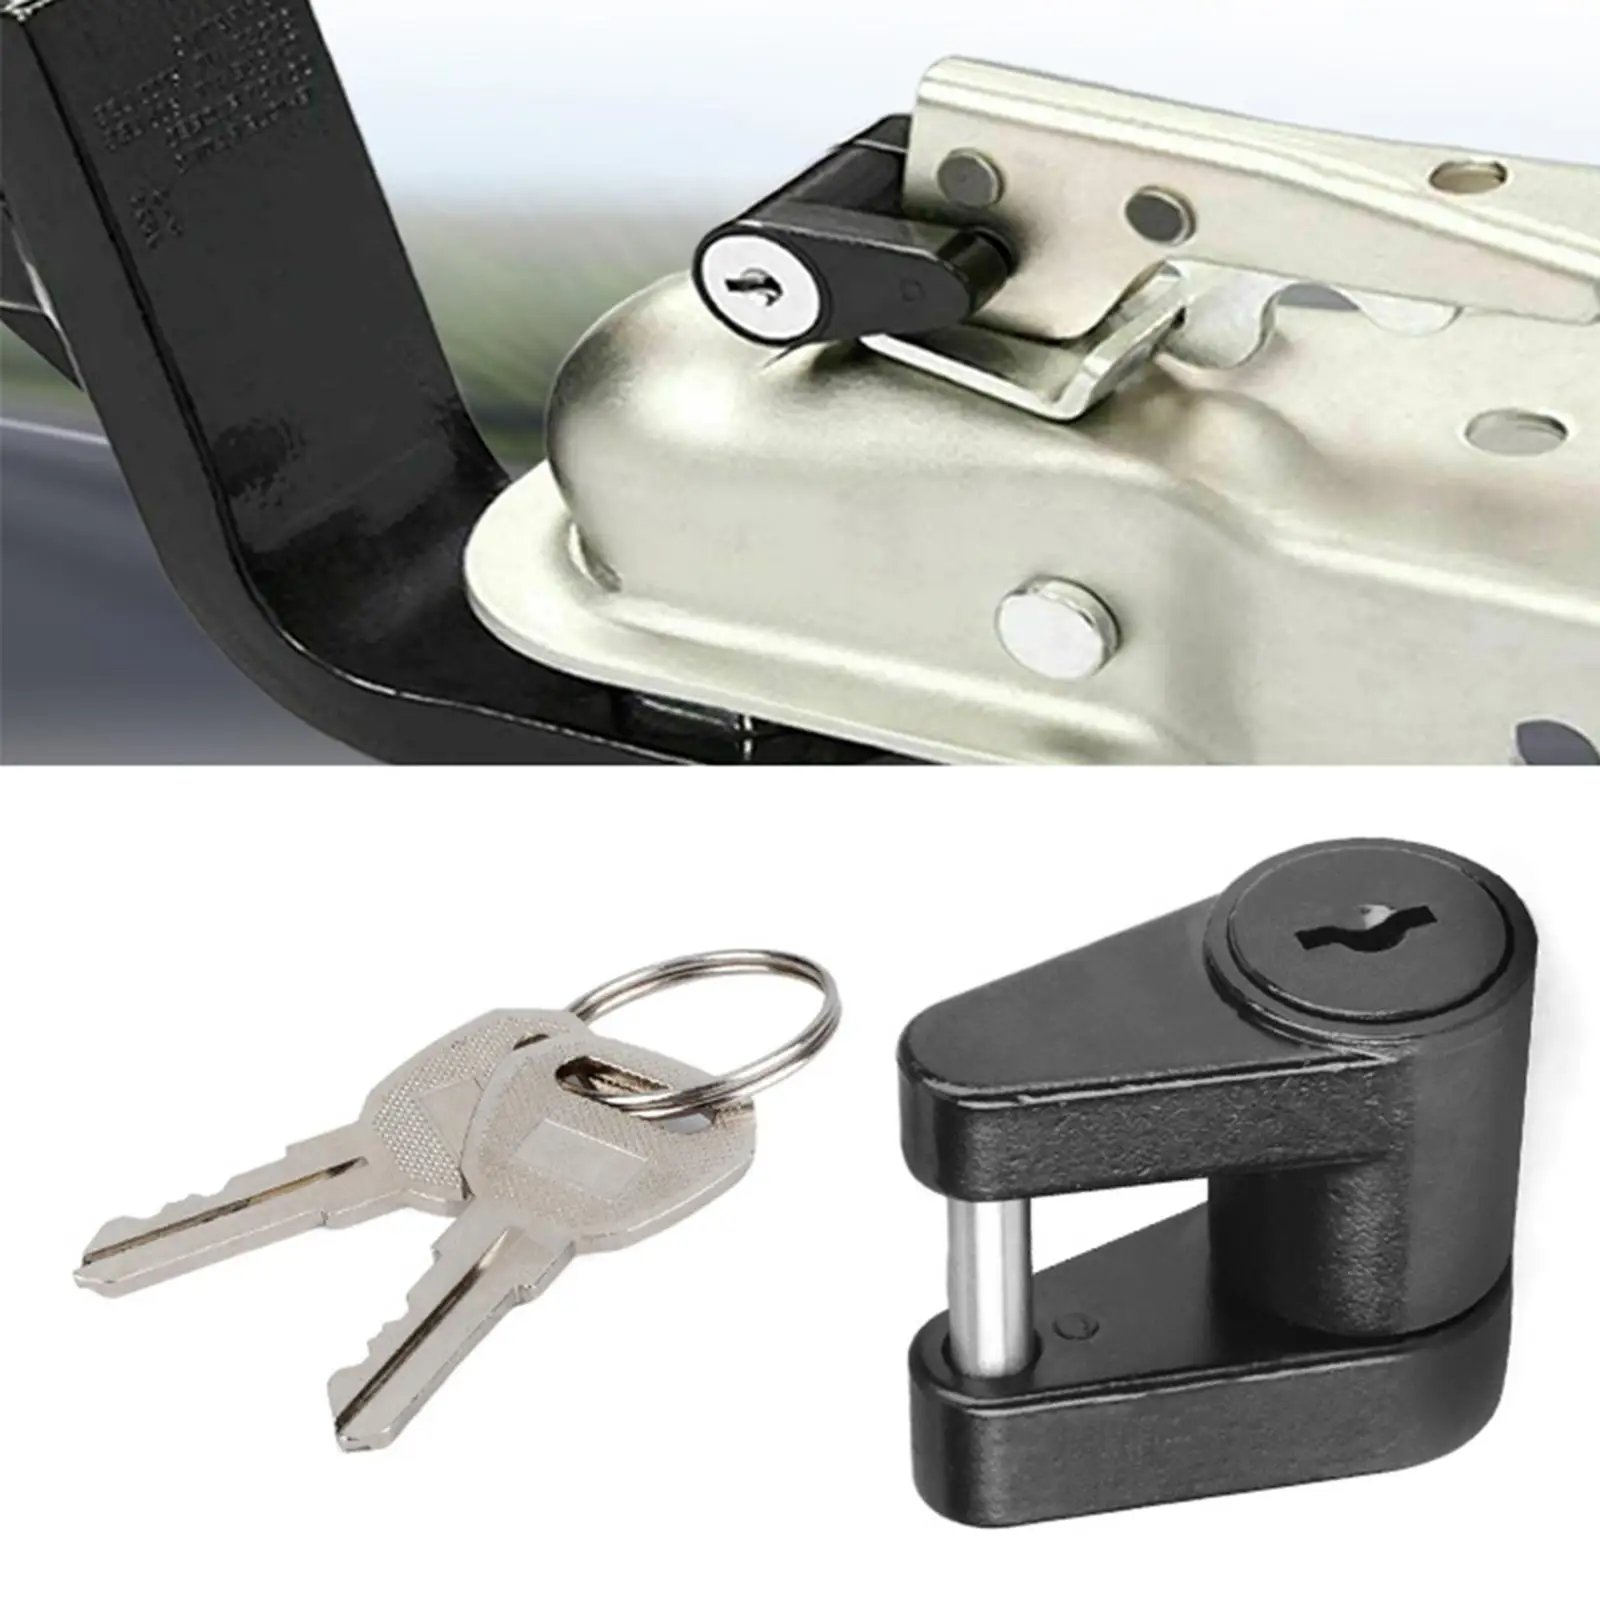 Trailer Hitch Coupler Lock with 2 Keys for Car Coupling lock RV